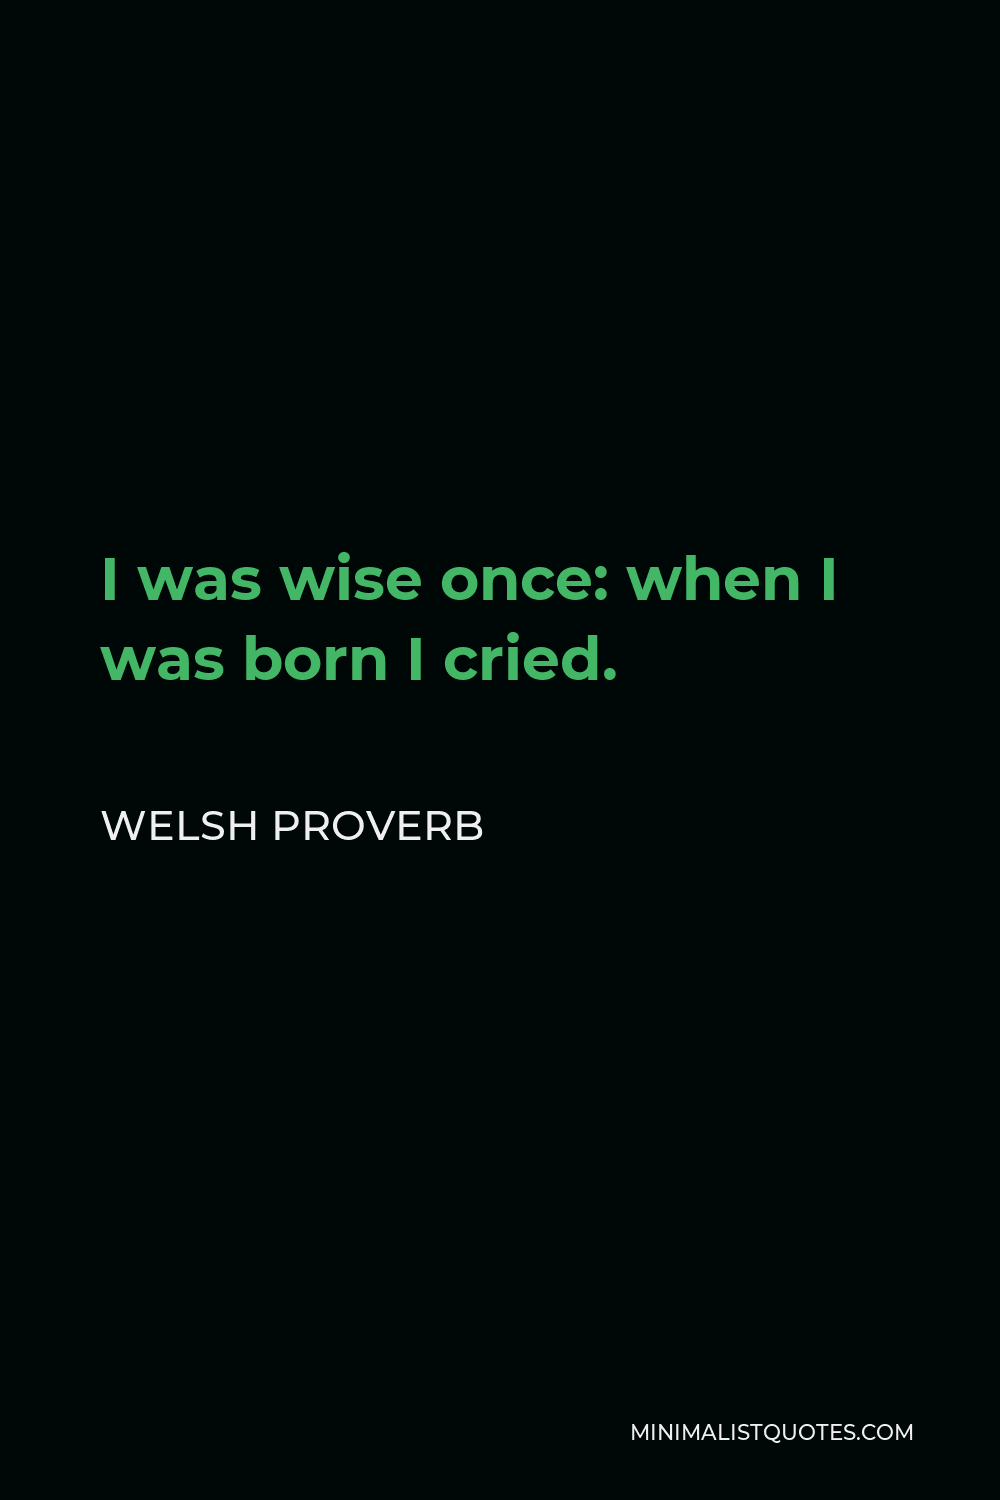 Welsh Proverb Quote - I was wise once: when I was born I cried.